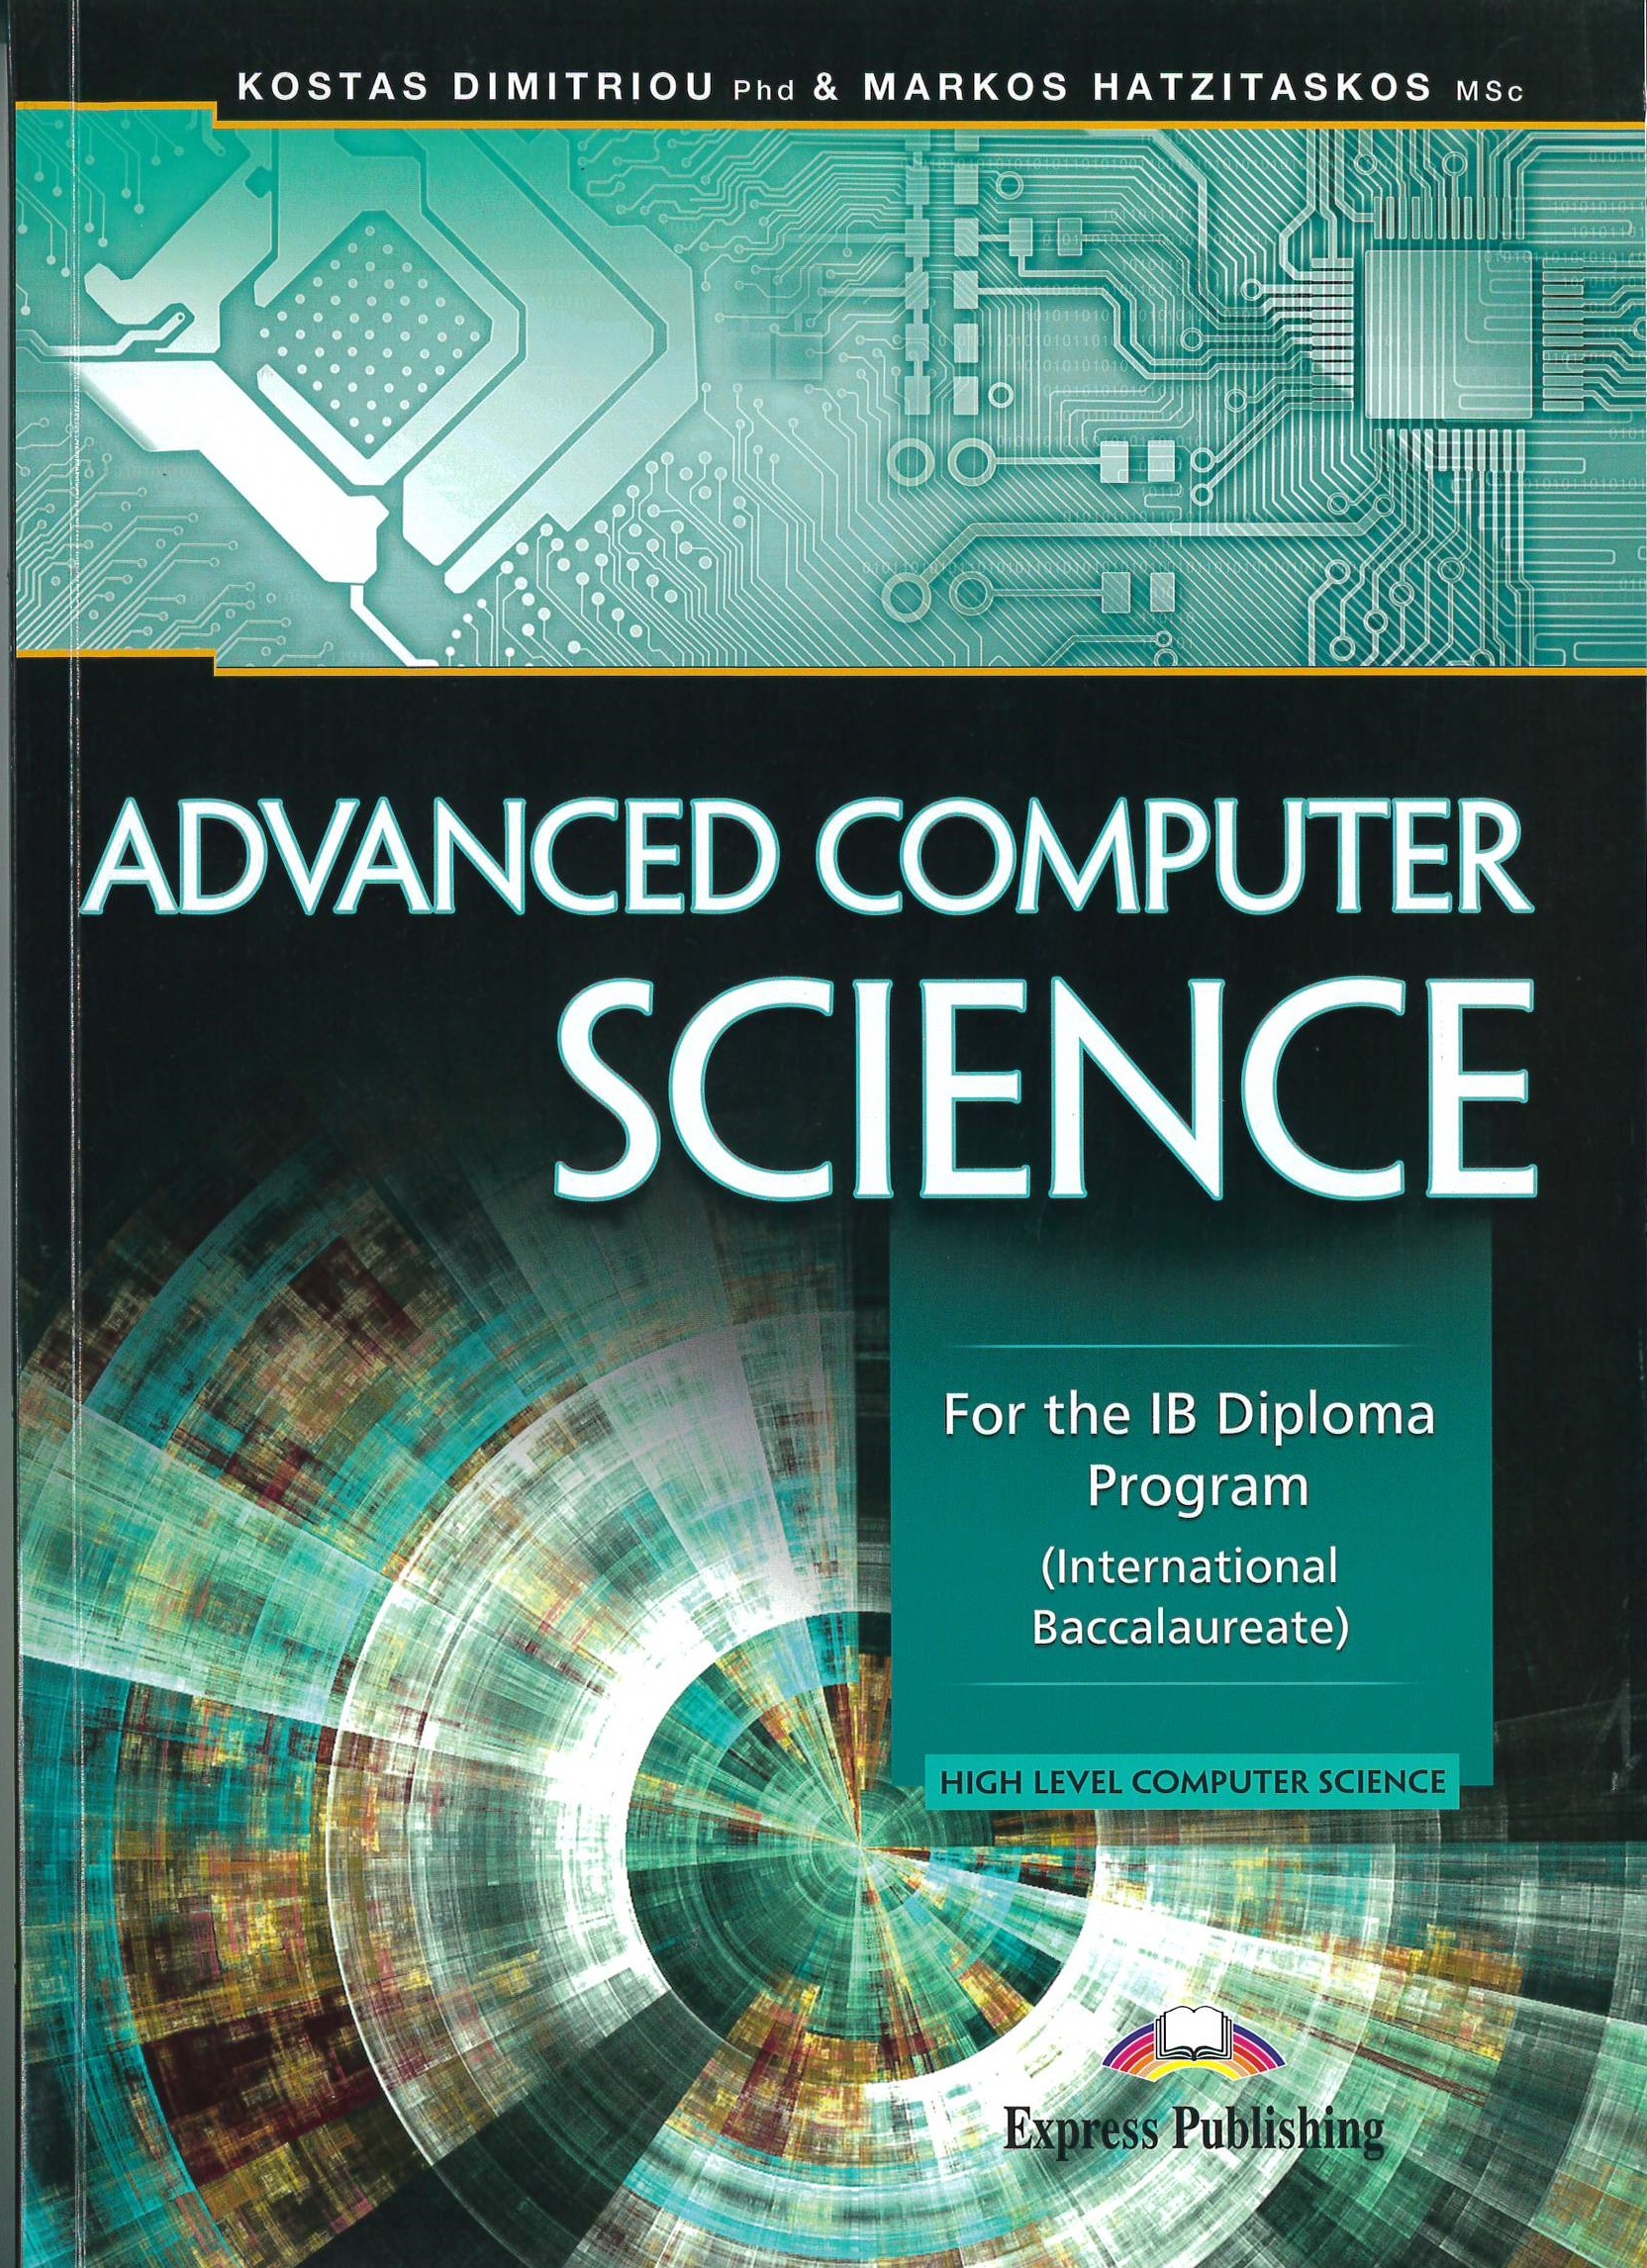 Advanced computer science : for the IB Diploma Program (International Baccalaureate) high level computer science